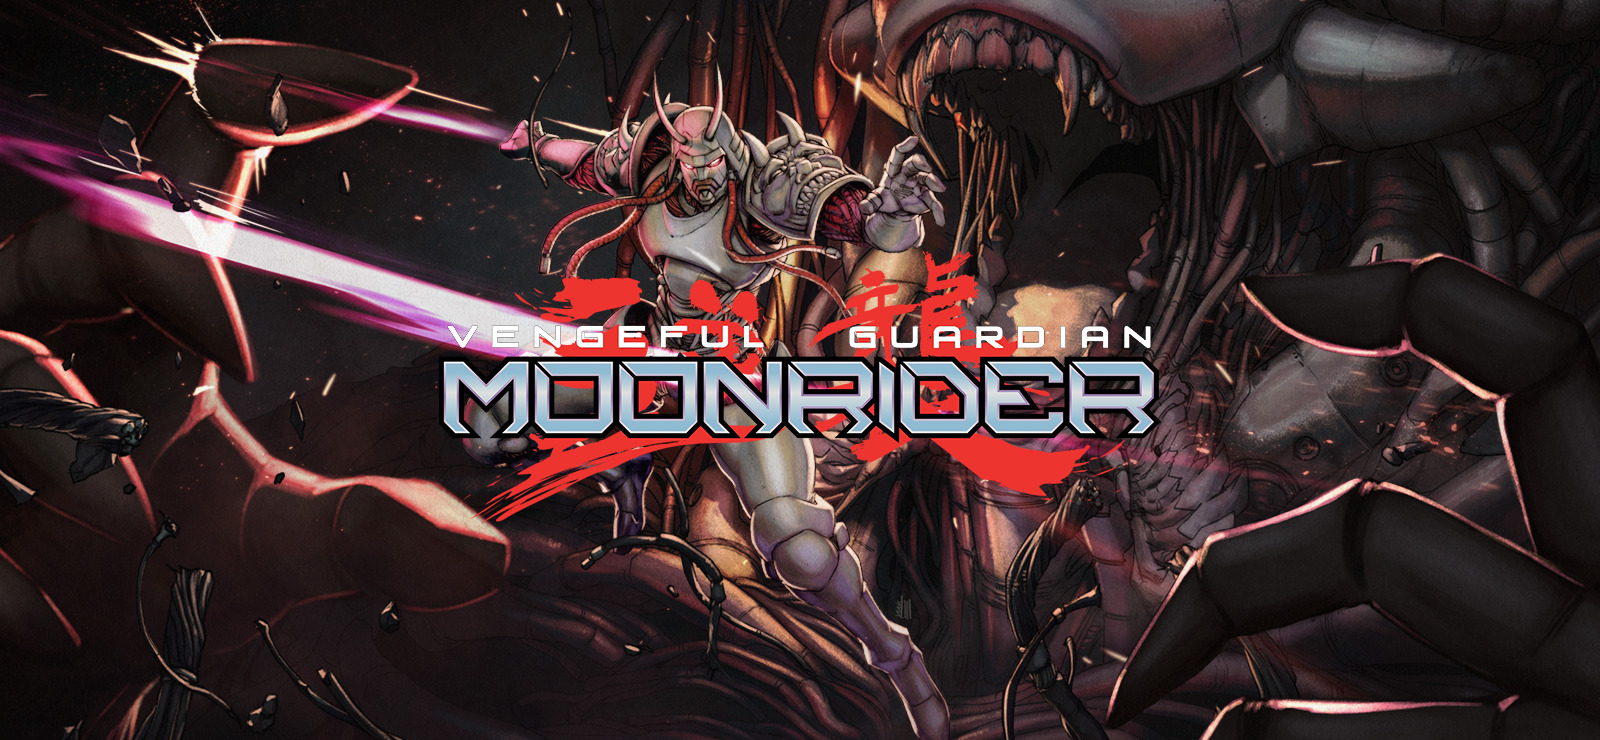 Vengeful Guardian: Moonrider Review – What am I Fighting For